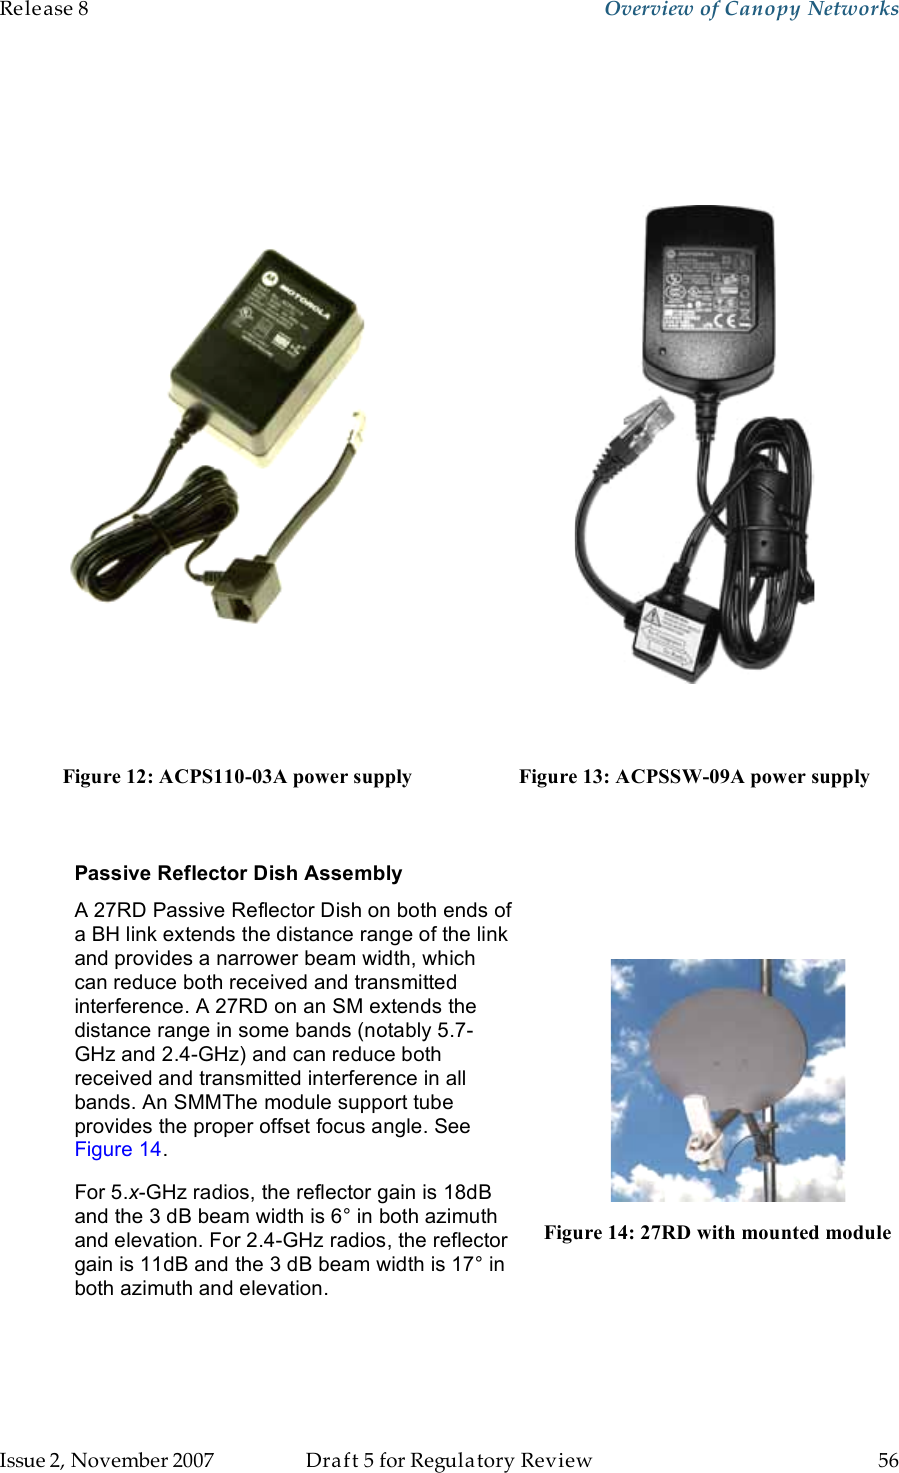 Release 8    Overview of Canopy Networks                  March 200                  Through Software Release 6.   Issue 2, November 2007  Draft 5 for Regulatory Review  56         Figure 12: ACPS110-03A power supply  Figure 13: ACPSSW-09A power supply  Passive Reflector Dish Assembly A 27RD Passive Reflector Dish on both ends of a BH link extends the distance range of the link and provides a narrower beam width, which can reduce both received and transmitted interference. A 27RD on an SM extends the distance range in some bands (notably 5.7-GHz and 2.4-GHz) and can reduce both received and transmitted interference in all bands. An SMMThe module support tube provides the proper offset focus angle. See Figure 14. For 5.x-GHz radios, the reflector gain is 18dB and the 3 dB beam width is 6° in both azimuth and elevation. For 2.4-GHz radios, the reflector gain is 11dB and the 3 dB beam width is 17° in both azimuth and elevation.  Figure 14: 27RD with mounted module 